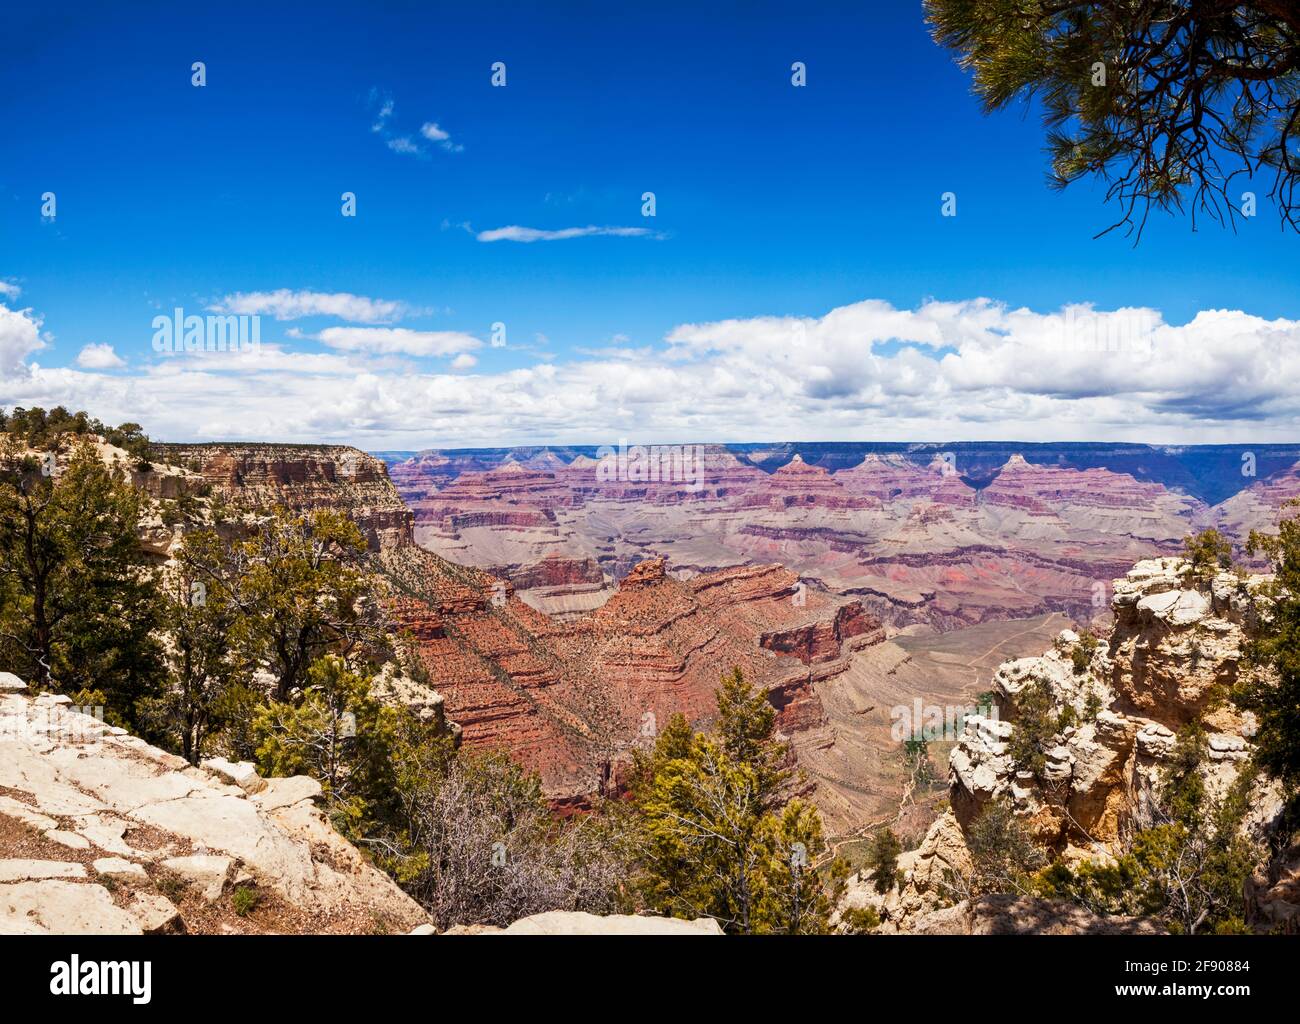 View of the Grand Canyon from the south rim, Arizona, USA Stock Photo